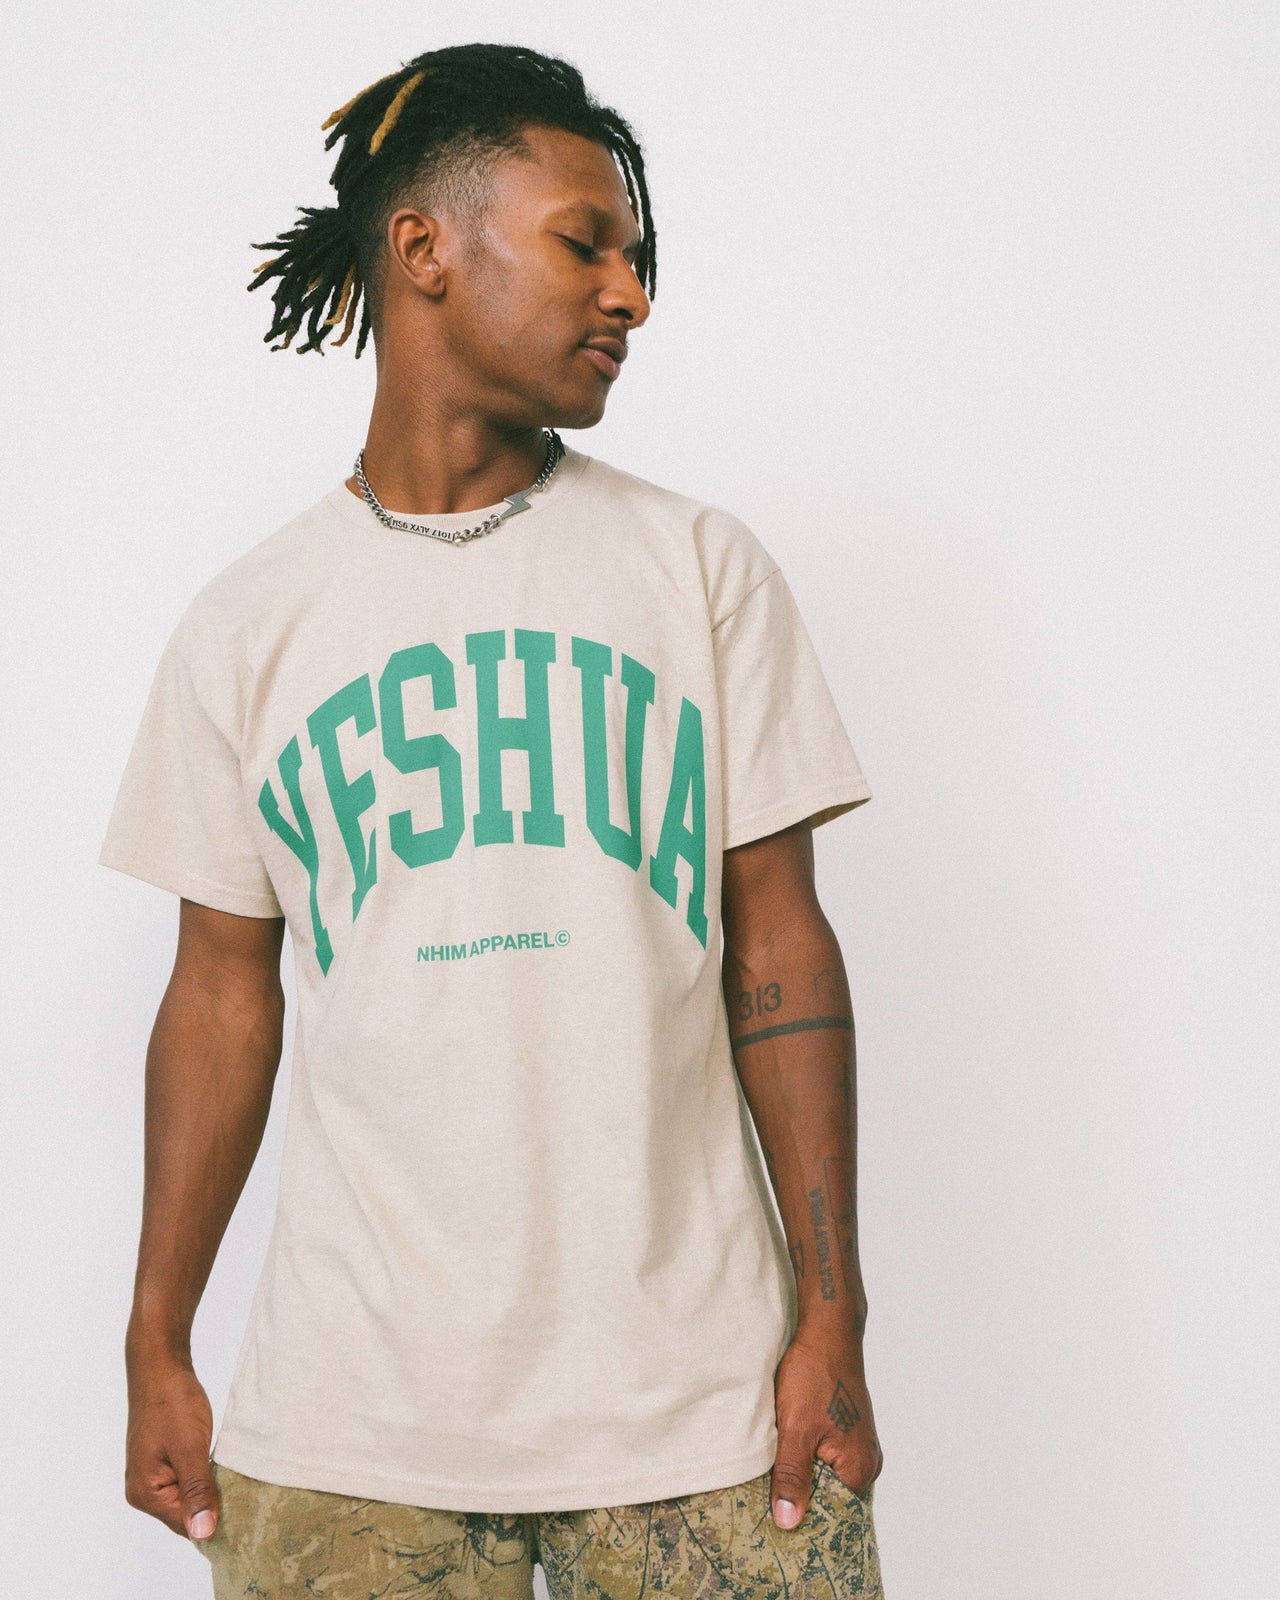 YESHUA shirt, Christian T-Shirts from NHIM Apparel Christian Clothing Brand, Sand color Yeshua T-Shirt with green writing